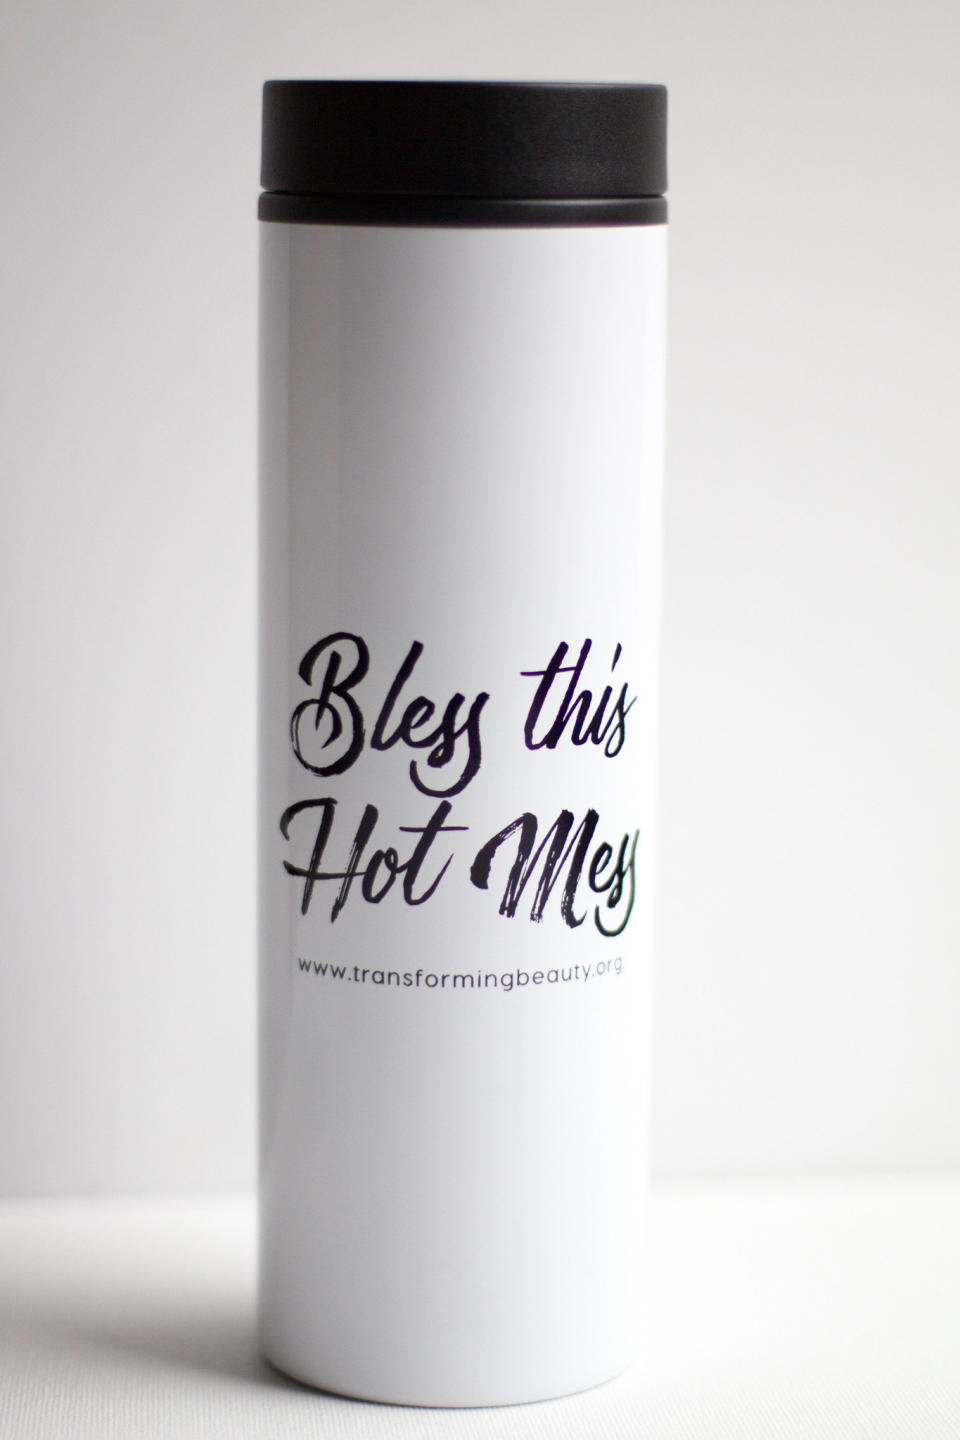 <a href="http://www.transformingbeautyshop.com/products/bless-this-hot-mess-travel-coffee-mug">Bless This Hot Mess Travel Coffee Mug, $12</a>